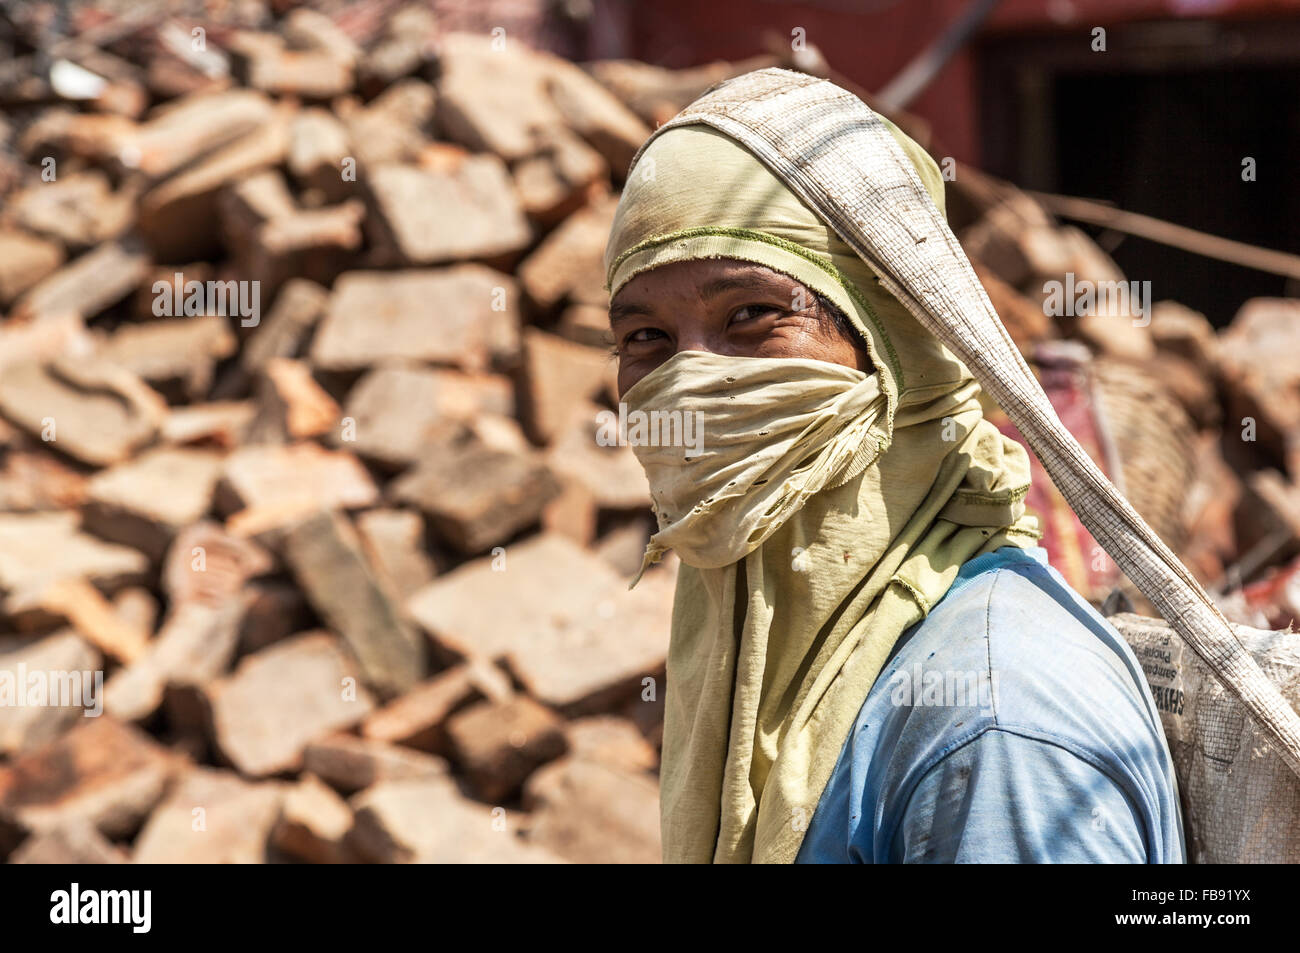 earthquake reconstruction worker in Kathmandu wearing a dust mask and carrying a sack of rubble Stock Photo